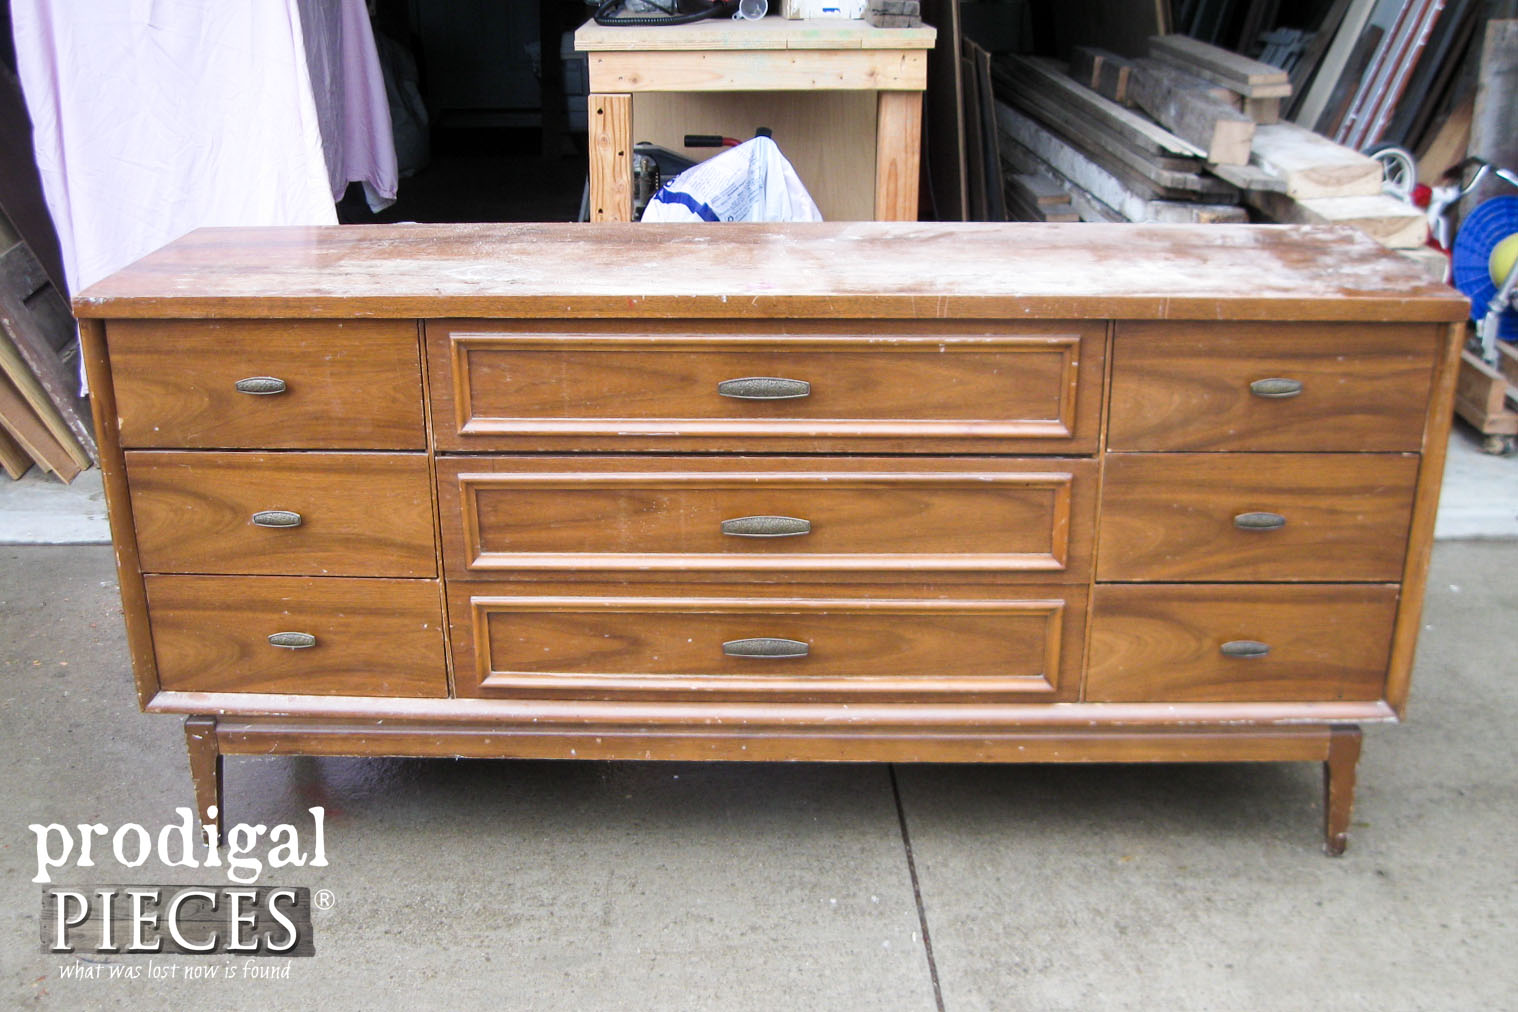 Before of Mid Century Modern Credenza | Prodigal Pieces | www.prodigalpieces.com